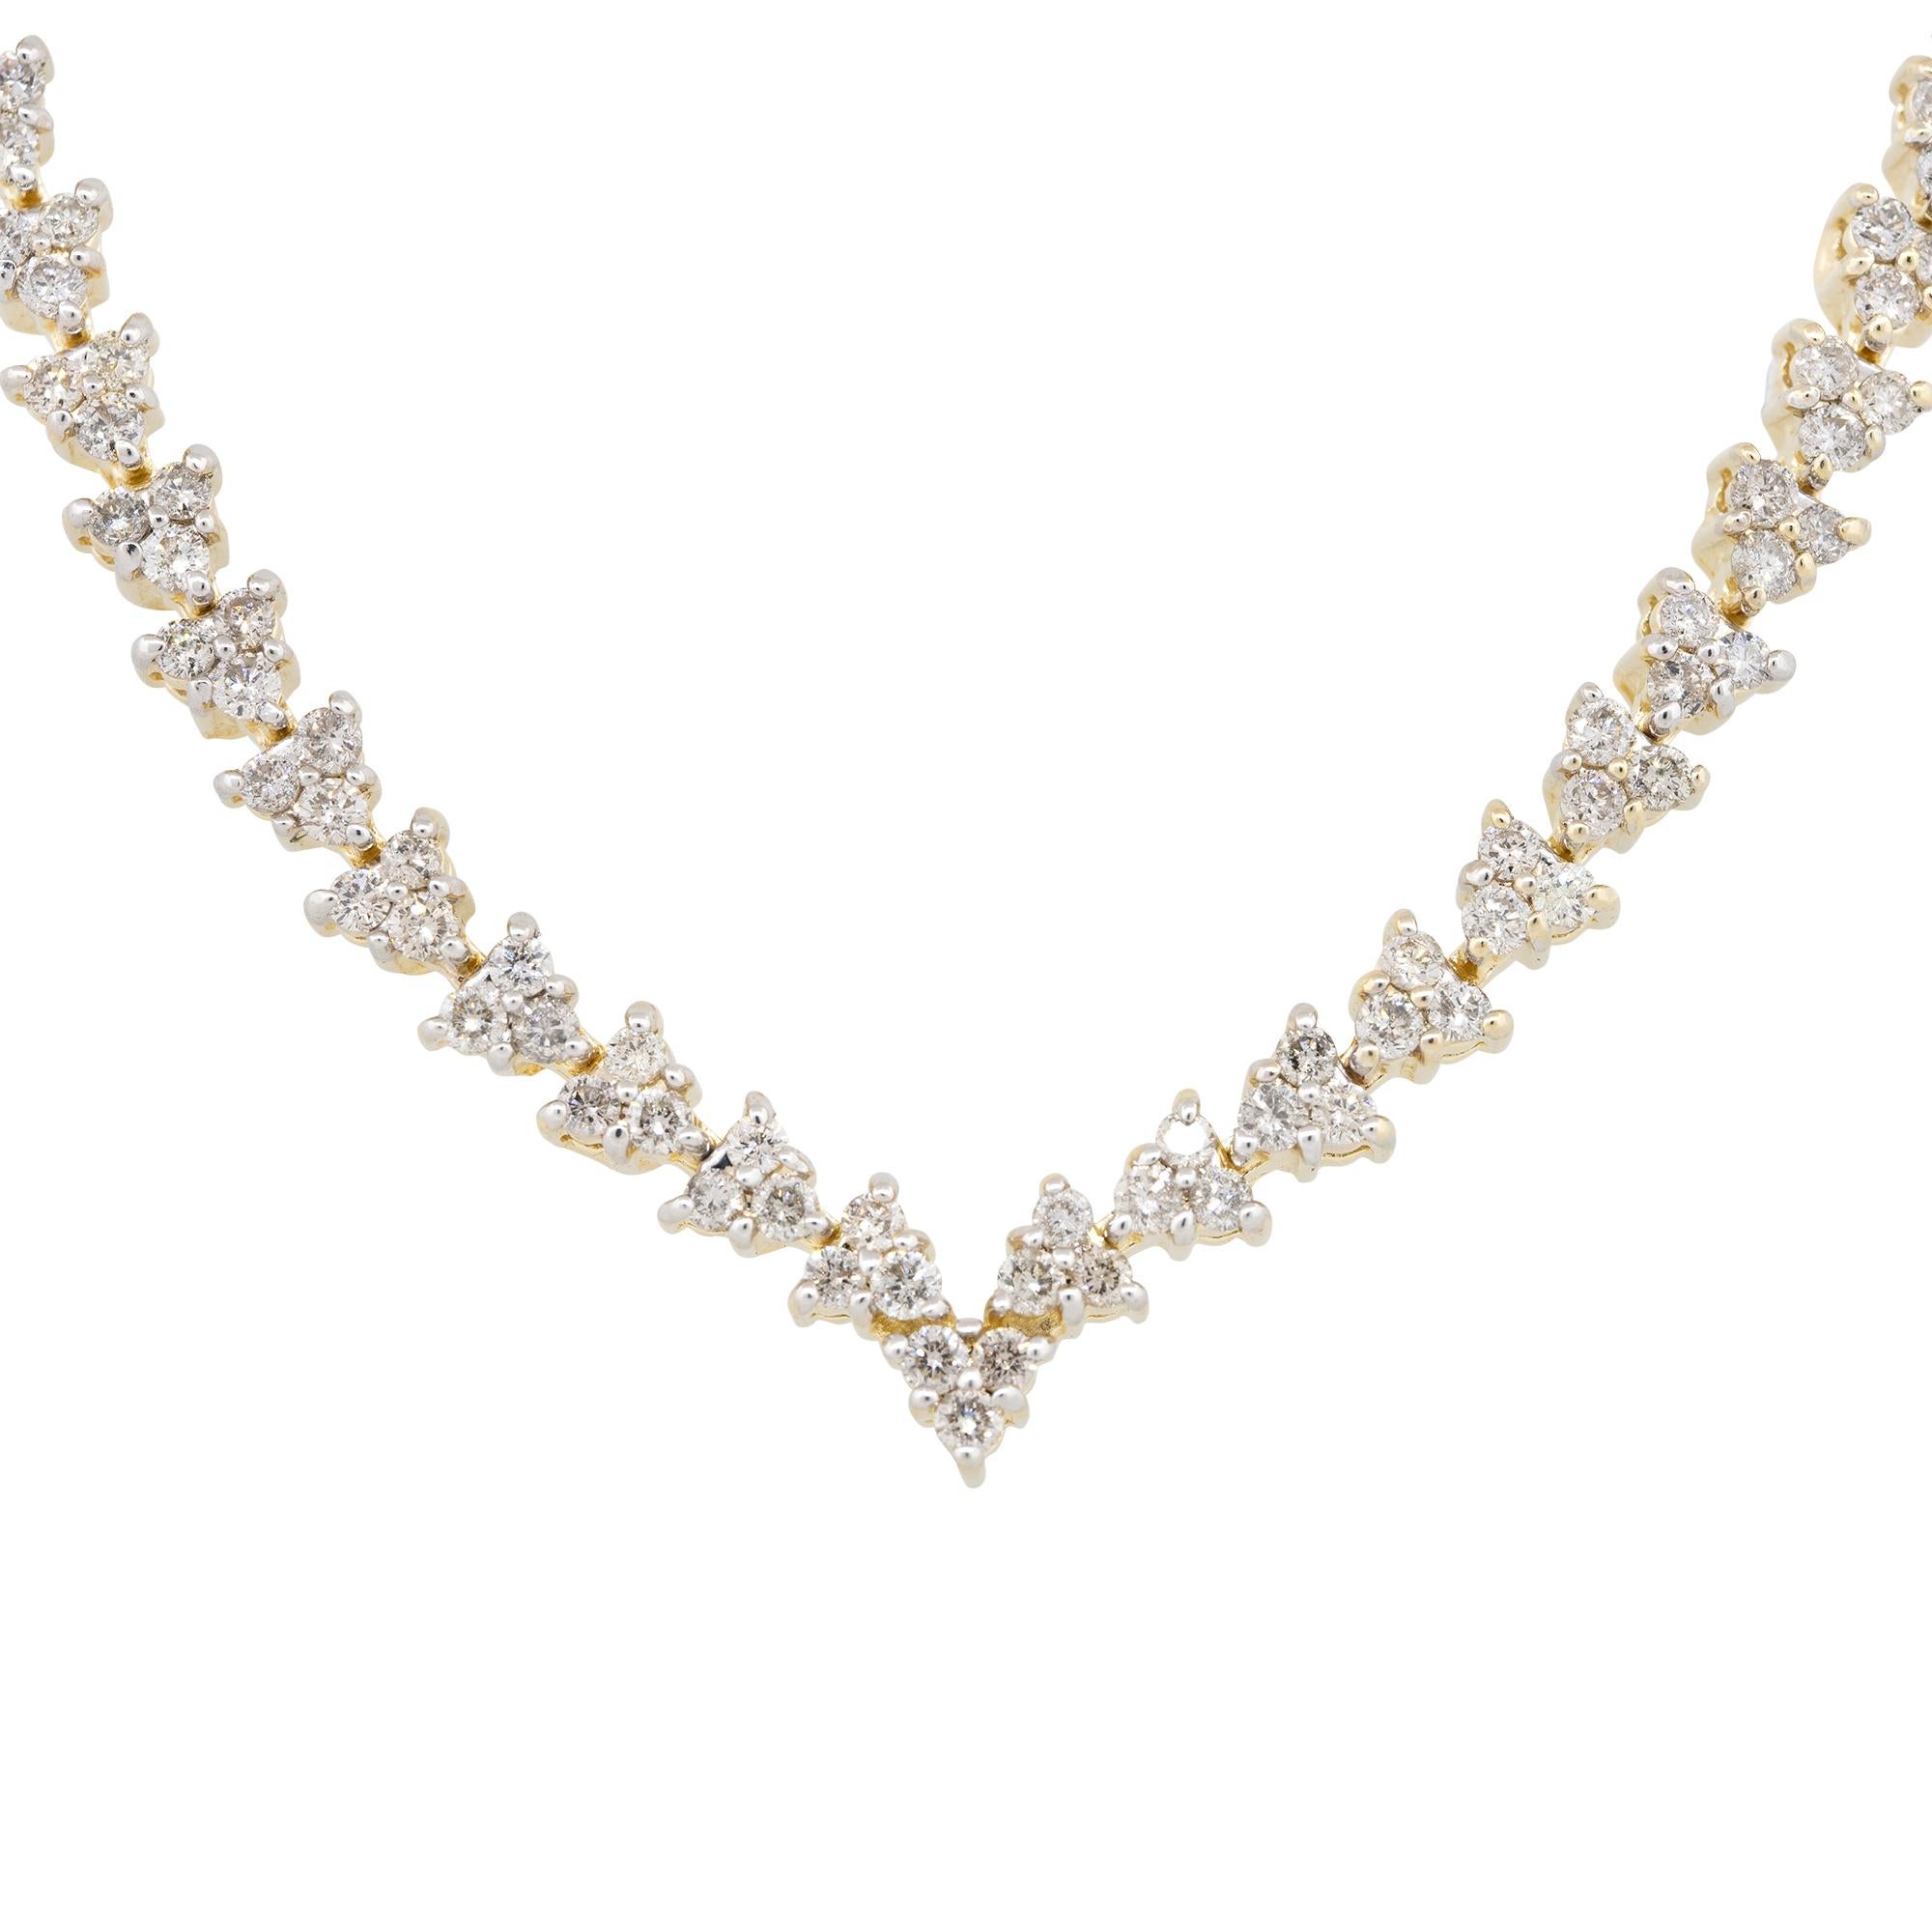 This tennis necklace showcases 5.50 carats of round brilliant diamonds all set in 14 karat yellow gold. The diamonds are near colorless, approximately a H/I in color, and are approximately SI in clarity. This necklace is a staple item for any women